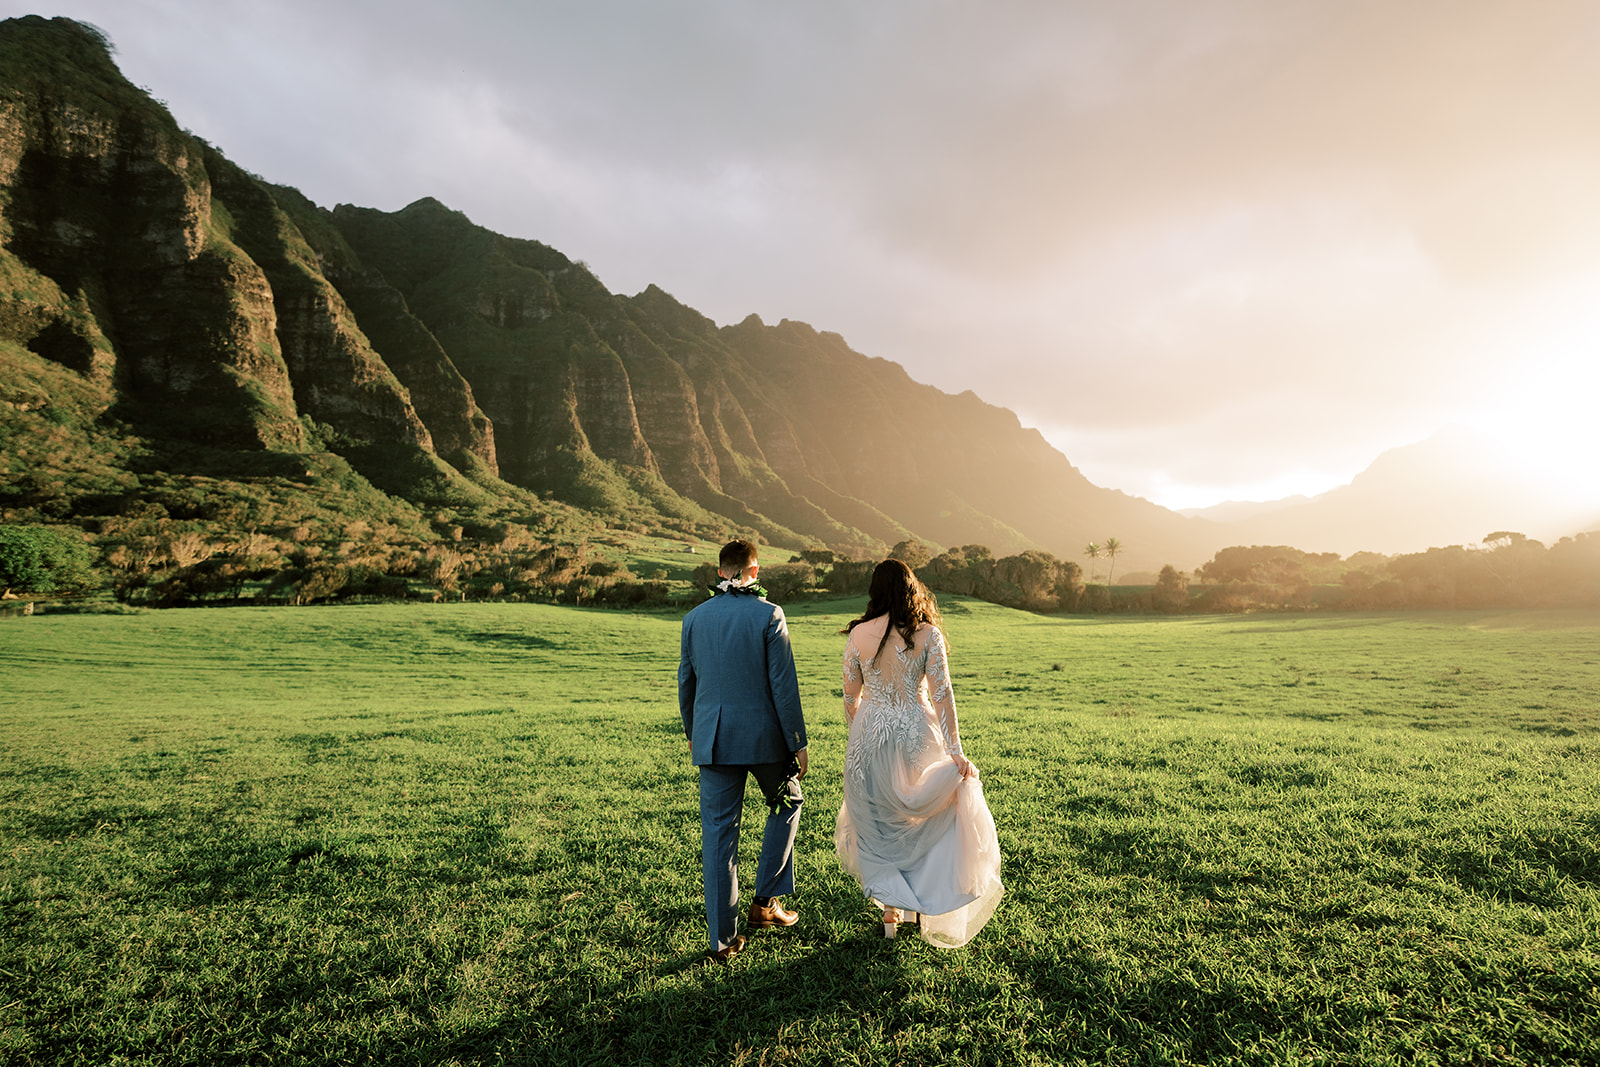 A bride and groom walking through a grassy field at sunset.